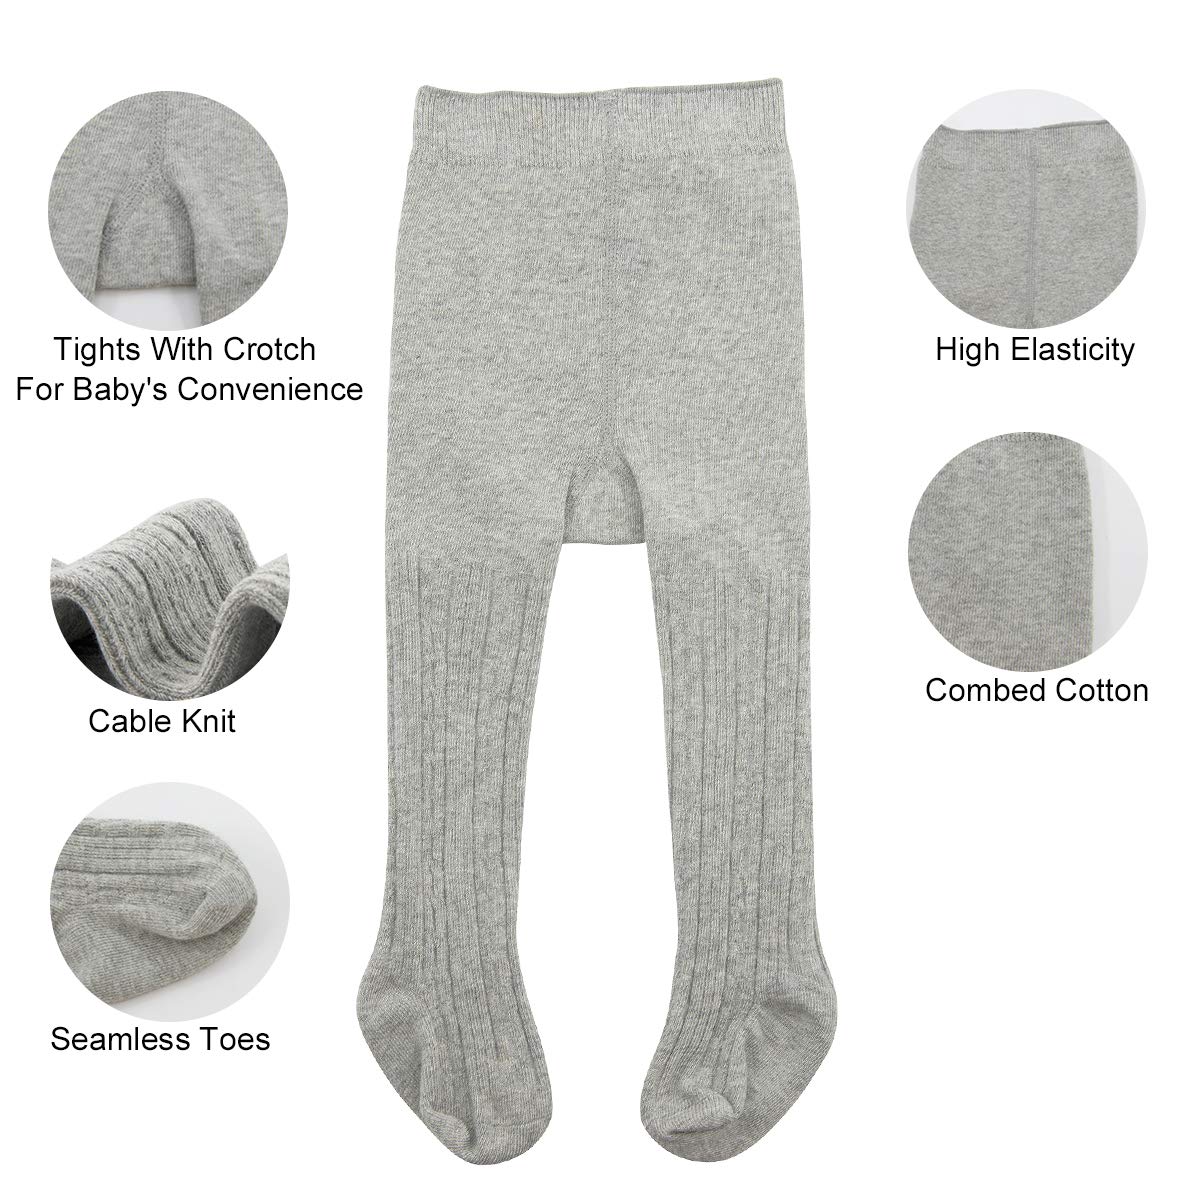 Zando Infant Soft Tights Toddler Seamless Leggings Tights for Baby Girls Winter Knit Warm Newborn Pants Stockings